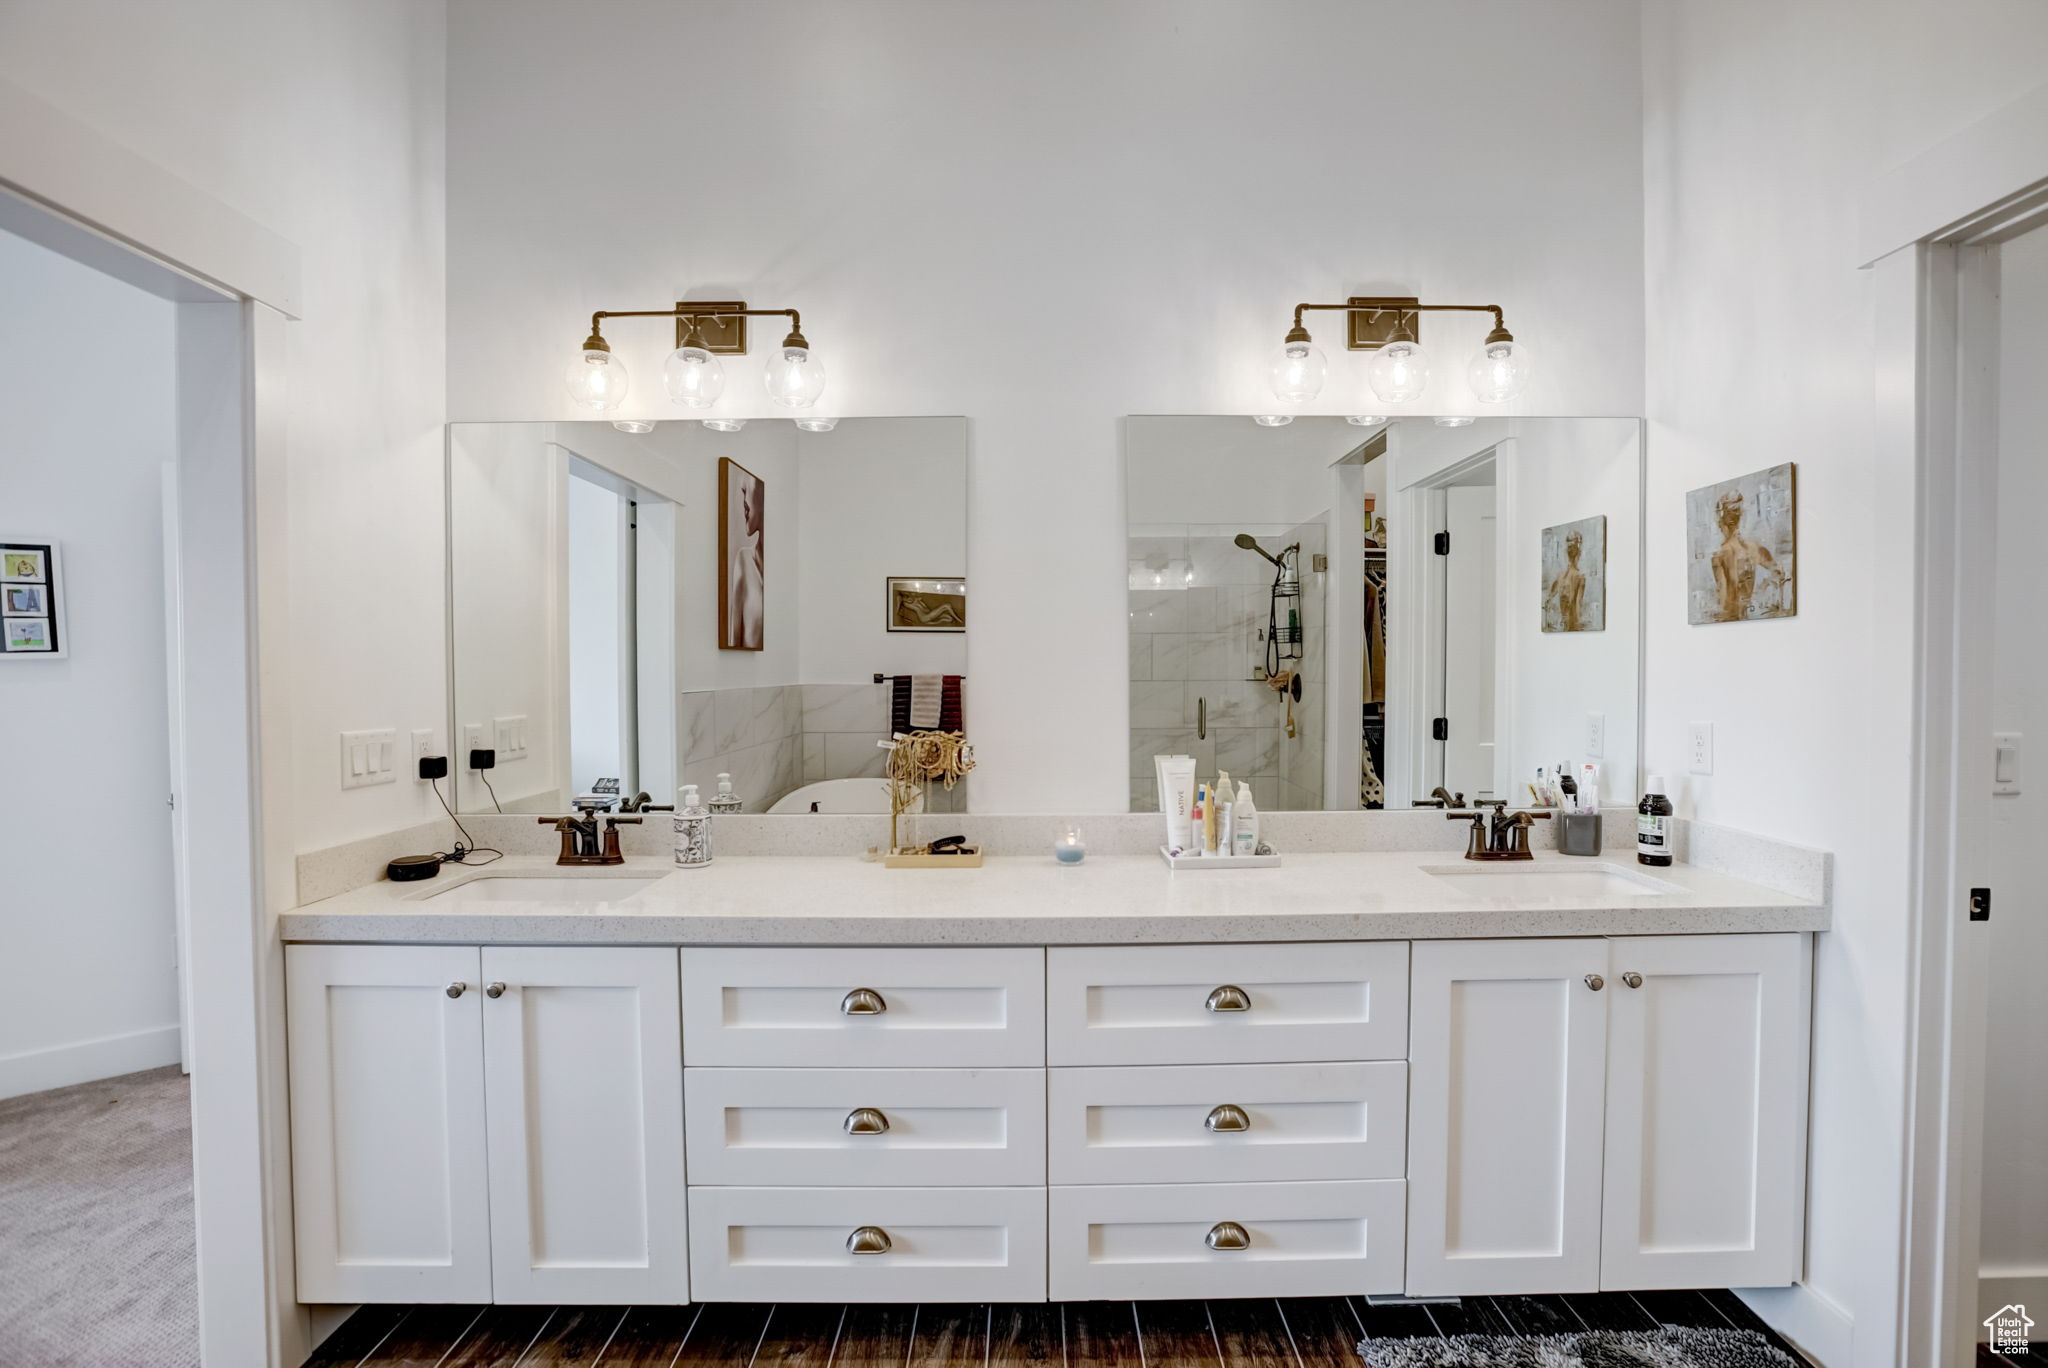 Bathroom featuring a tile shower, double sink, and large vanity